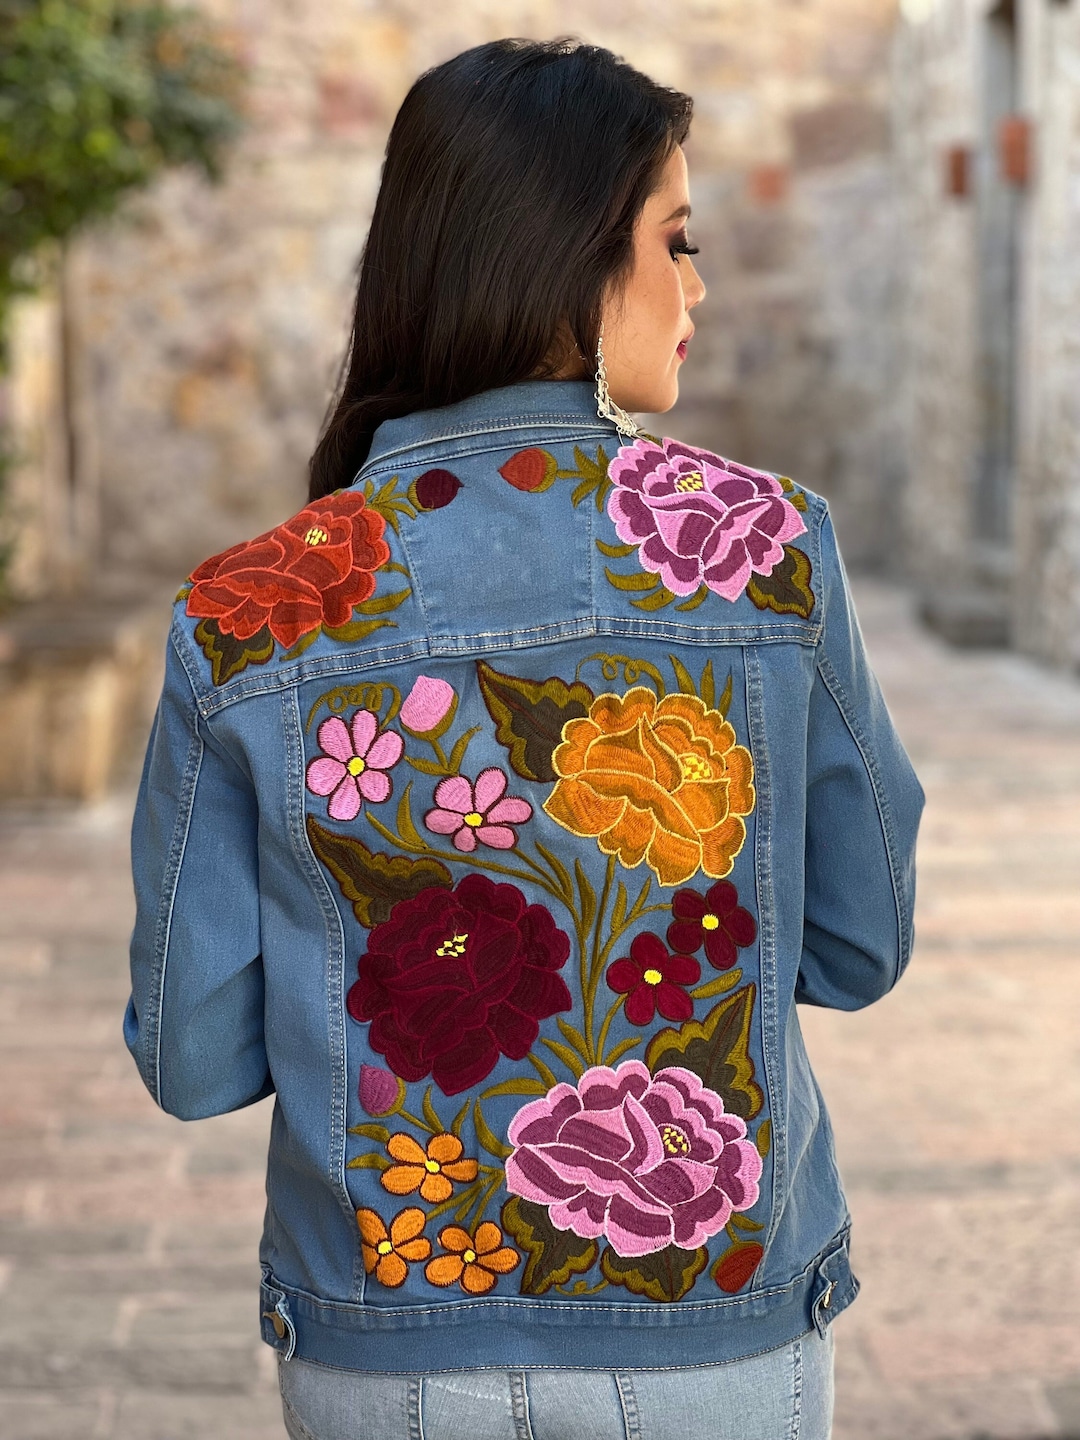 Mexican Floral Embroidered Jeans Jacket. Mexican Artisanal -  UK